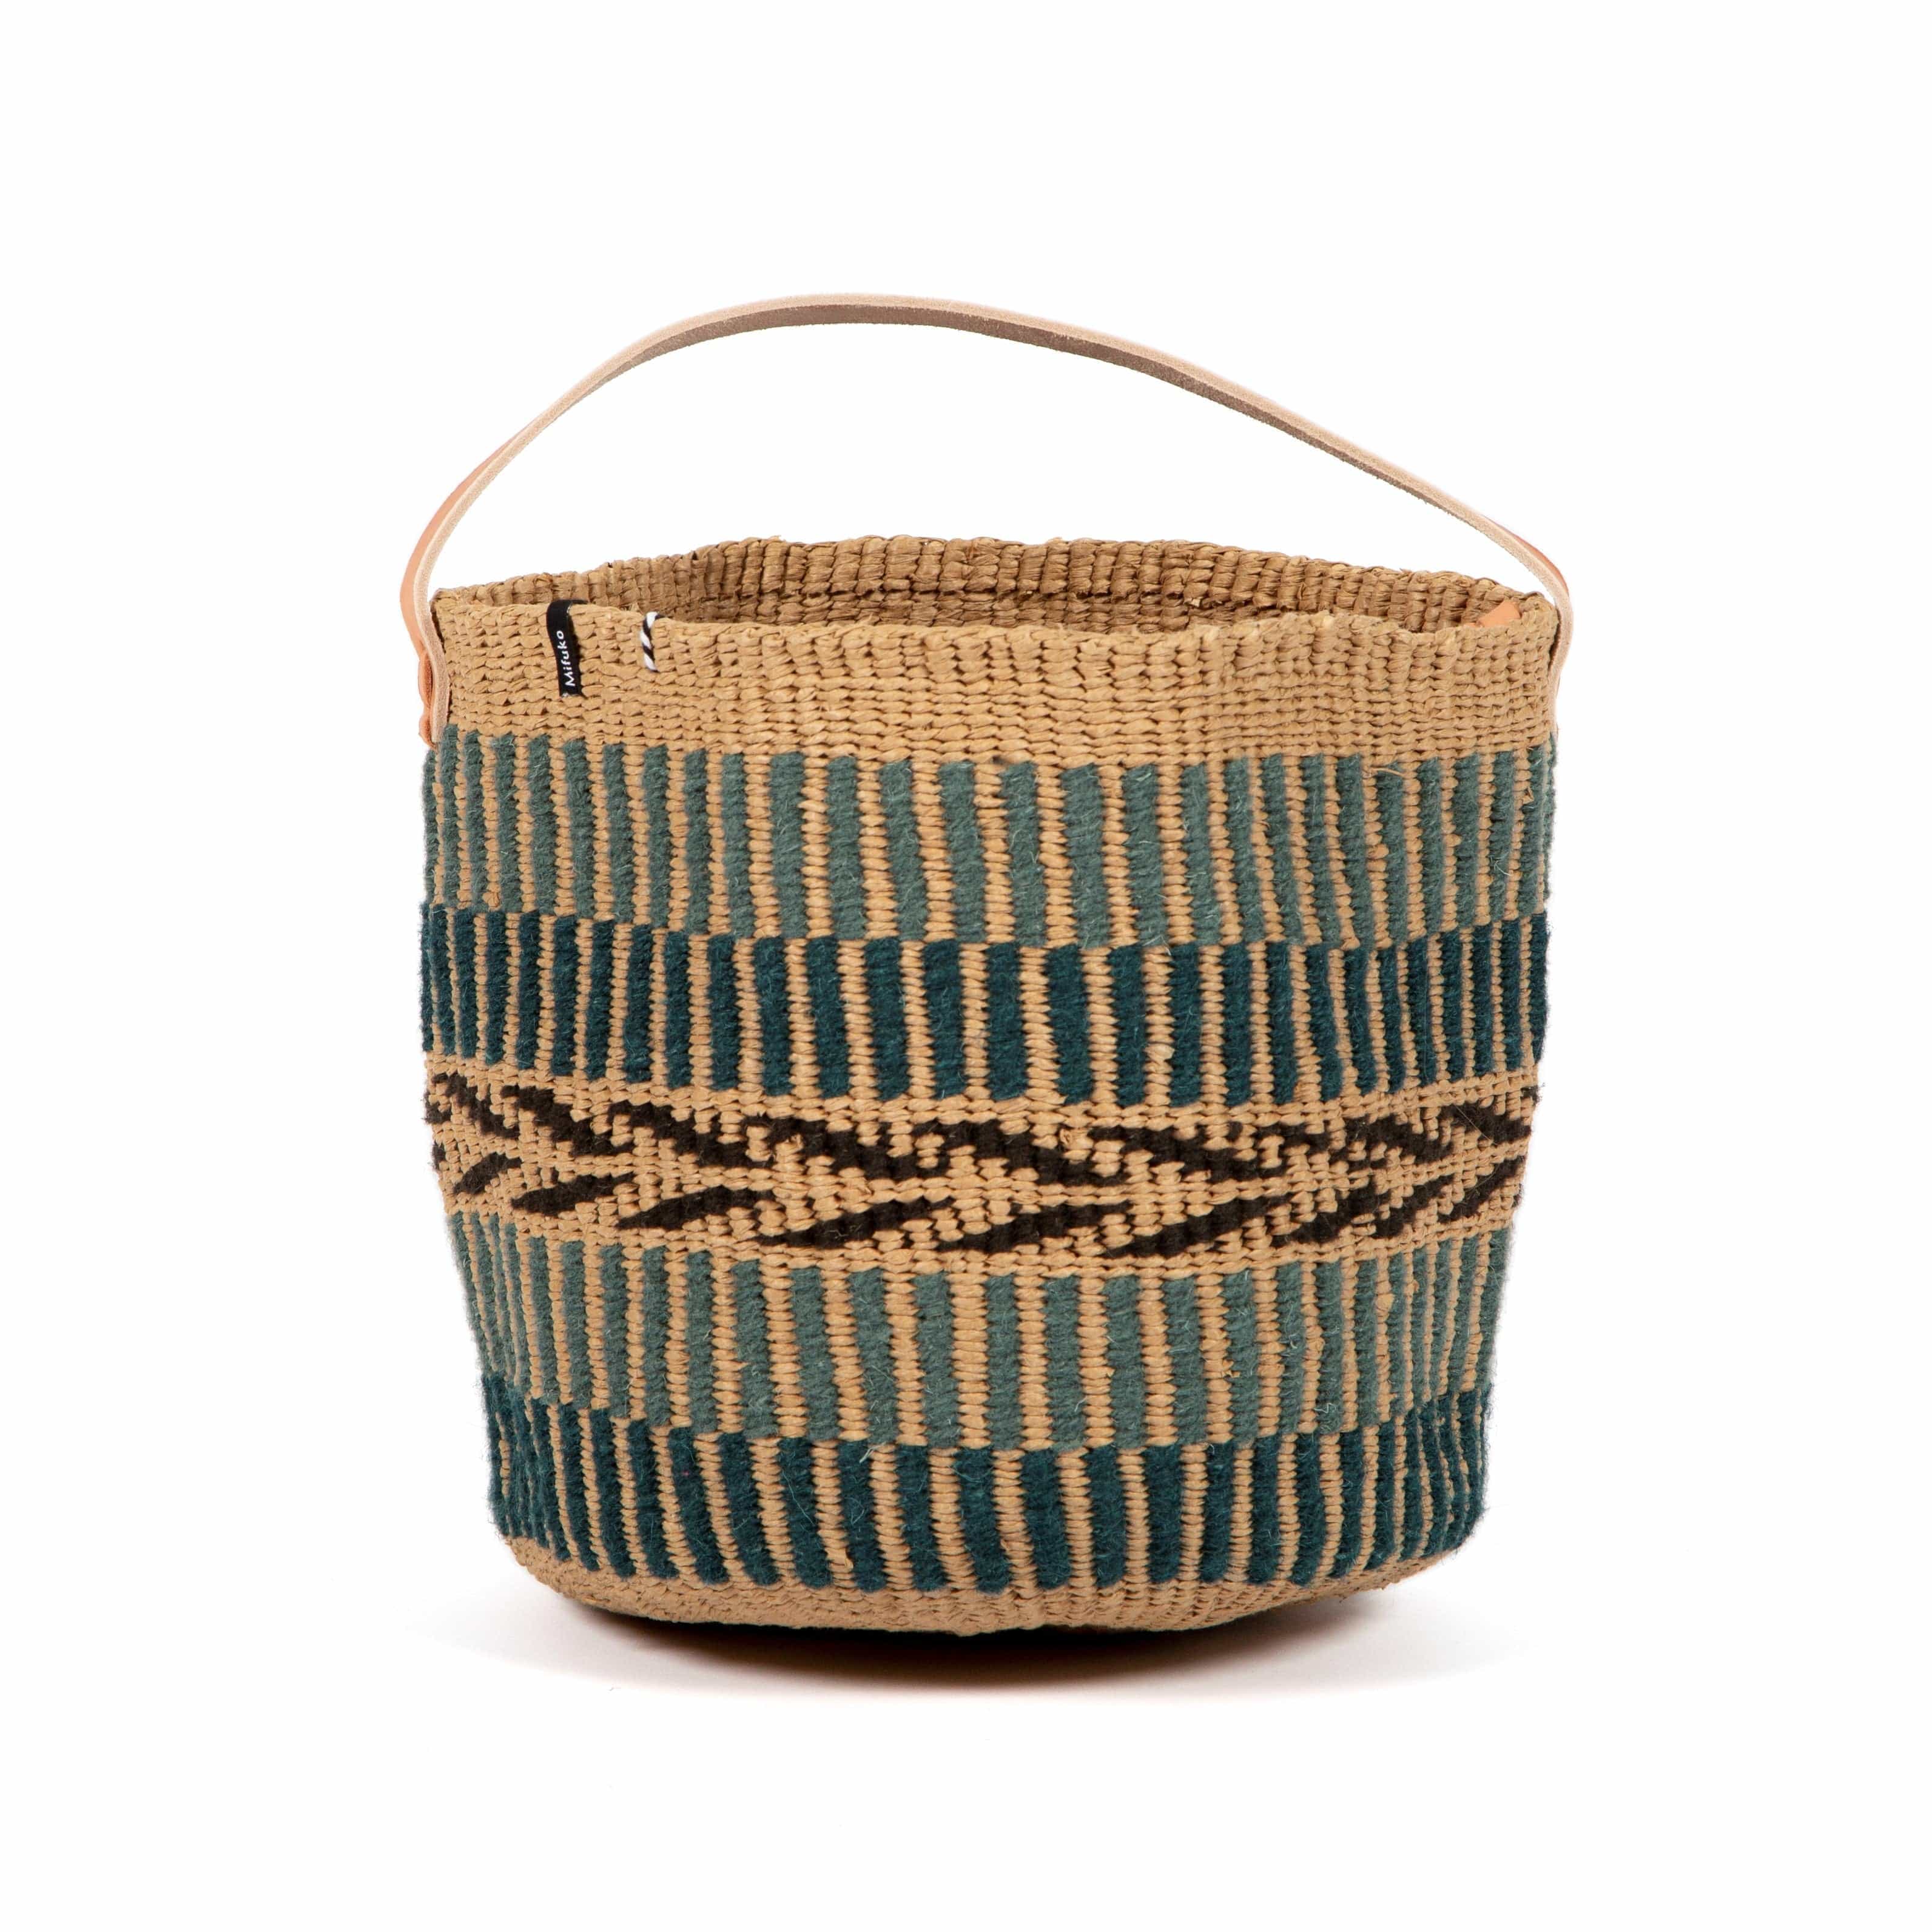 Mifuko Wool and paper Small basket with short handle Pamba basket with handle | Green pattern weave S